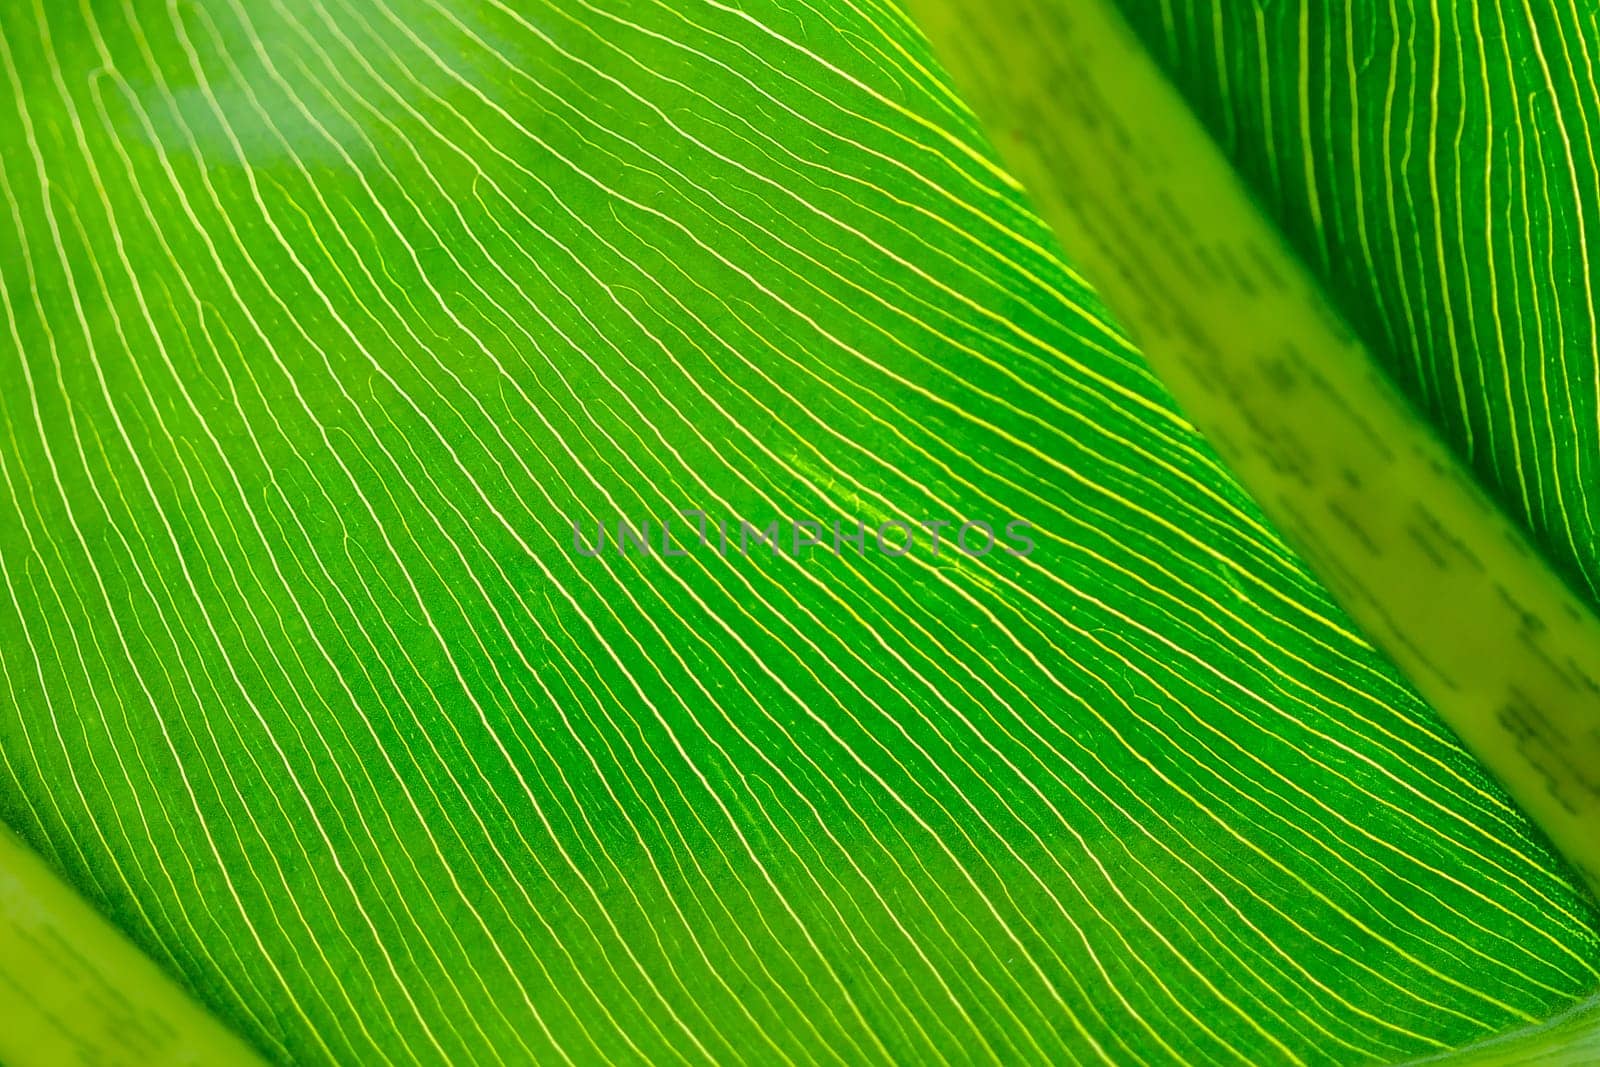 The back of green leaves with beautiful patterns by Puripatt